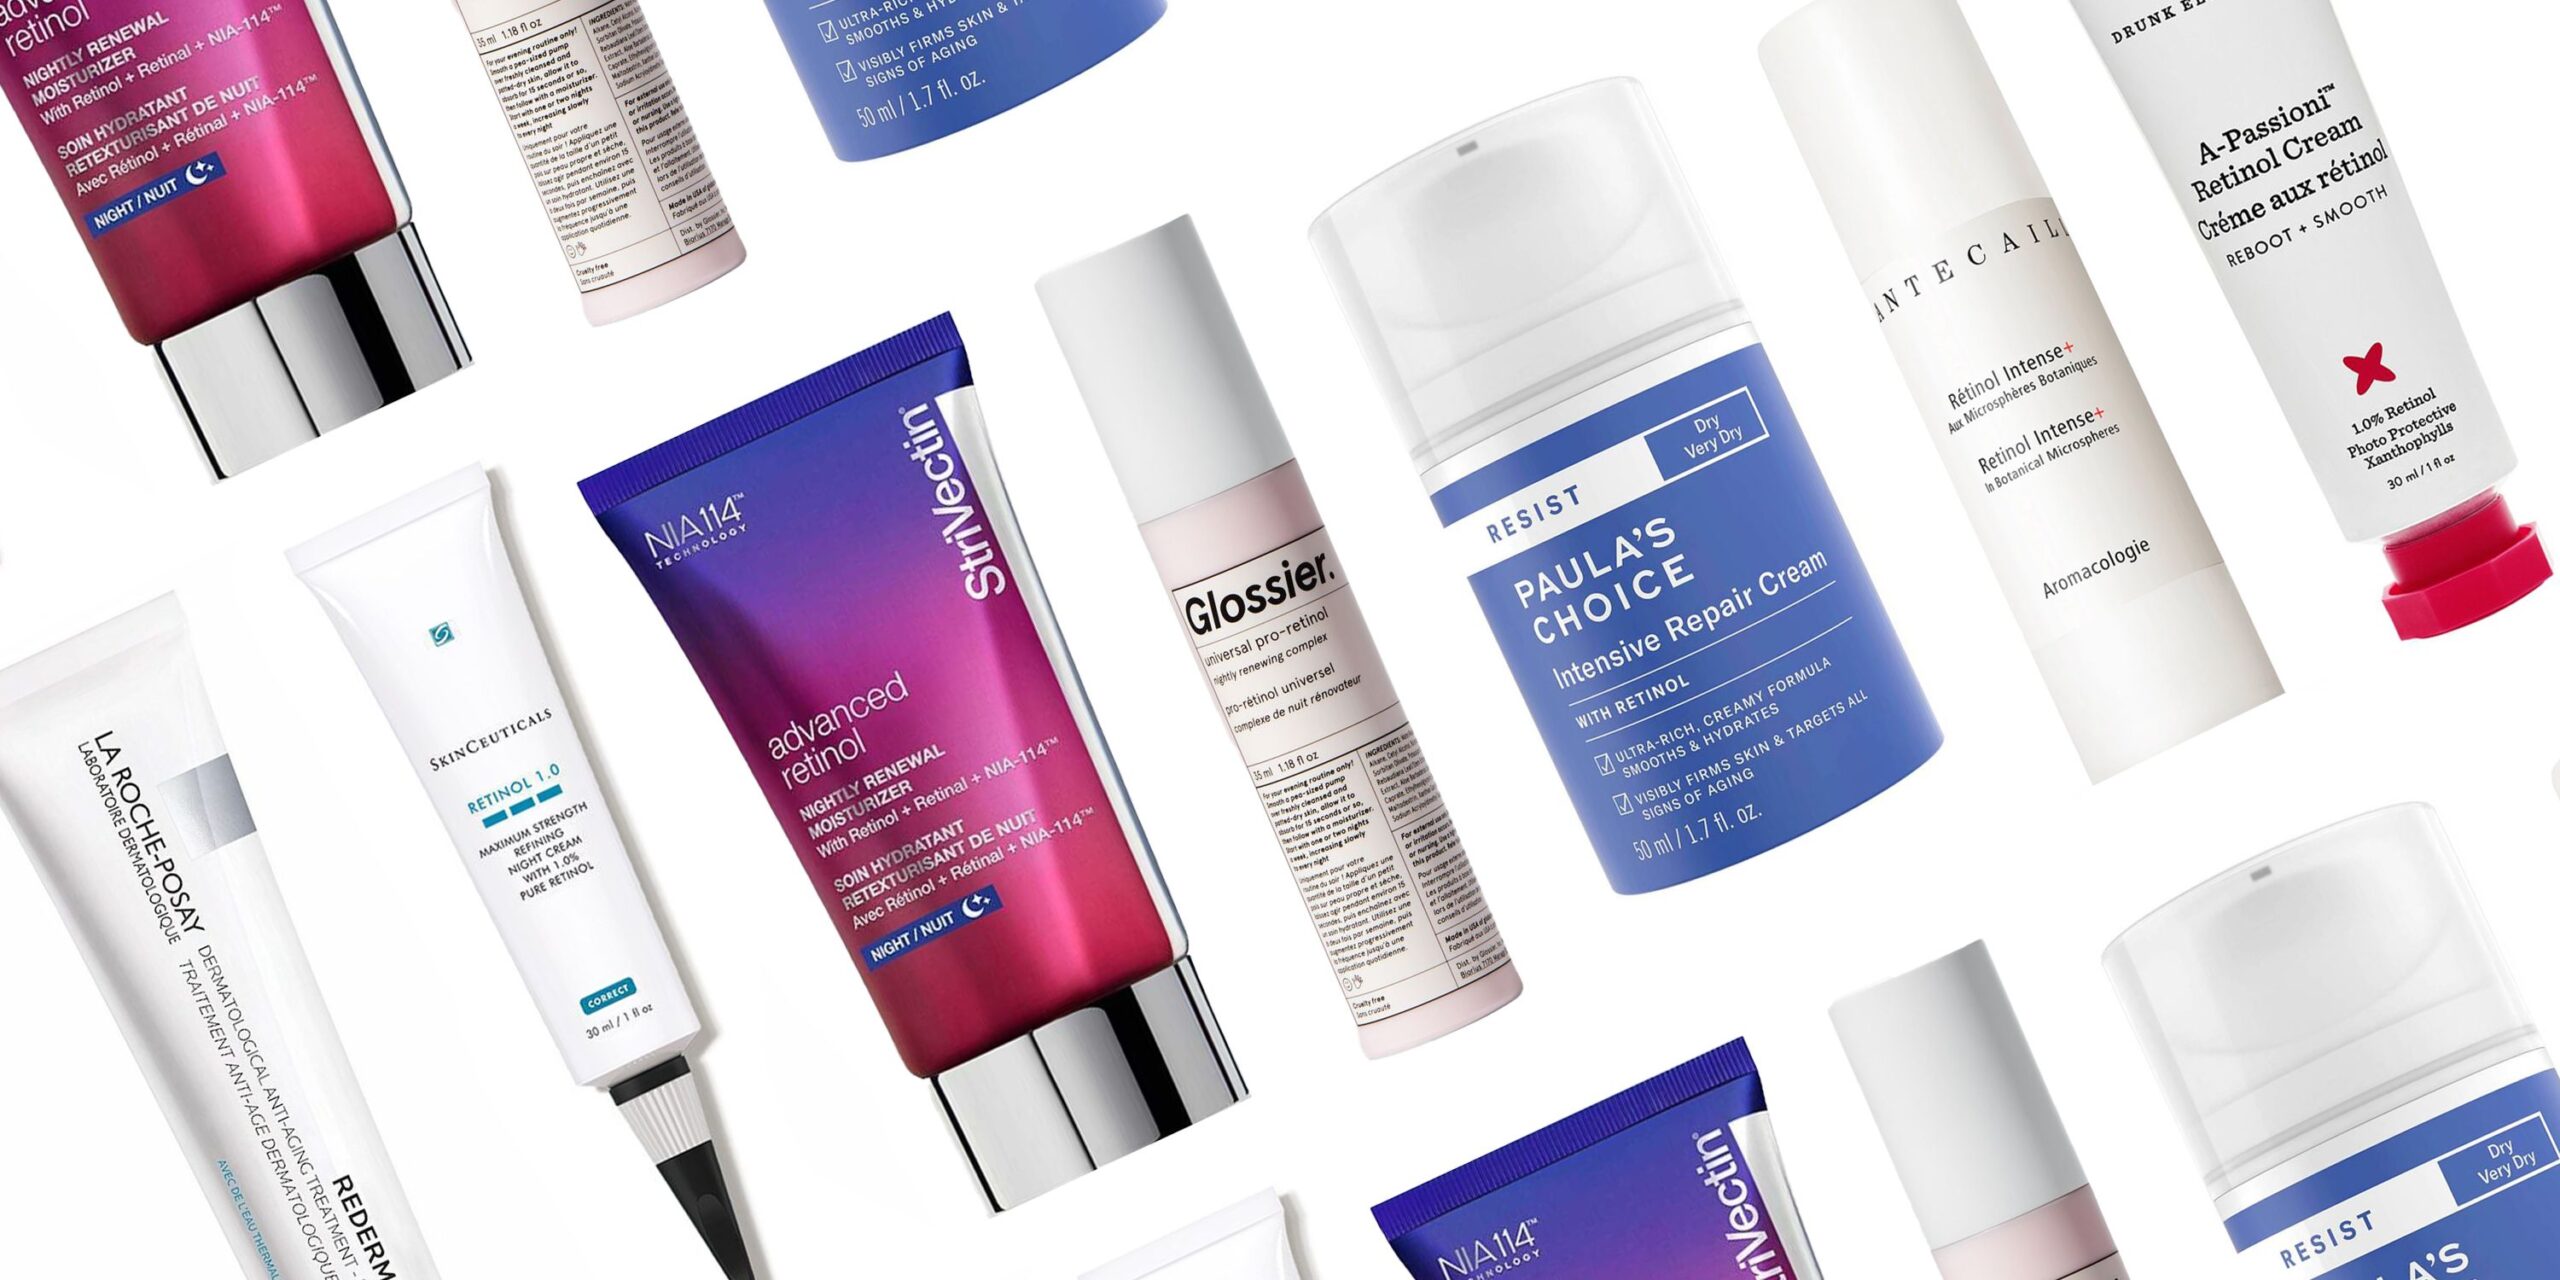 Why You Should Incorporate Retinol in Your Skincare Routine